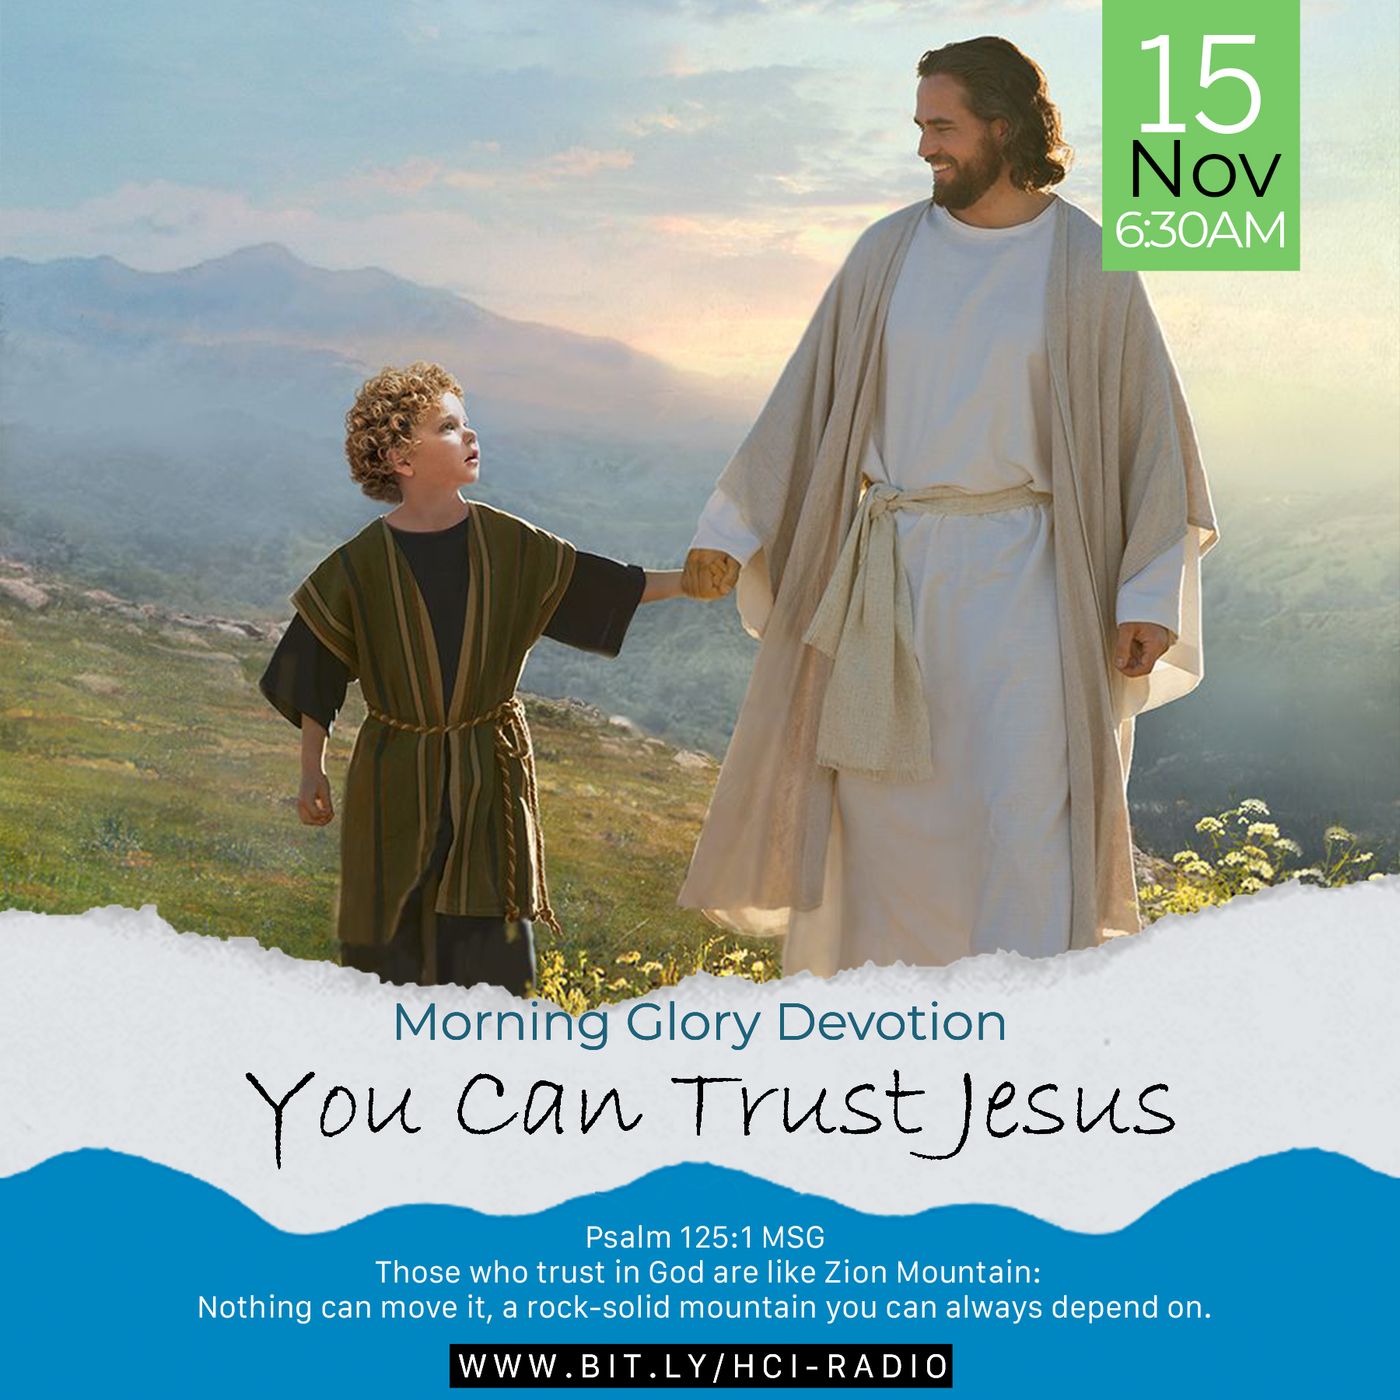 MGD: You Can Trust Jesus